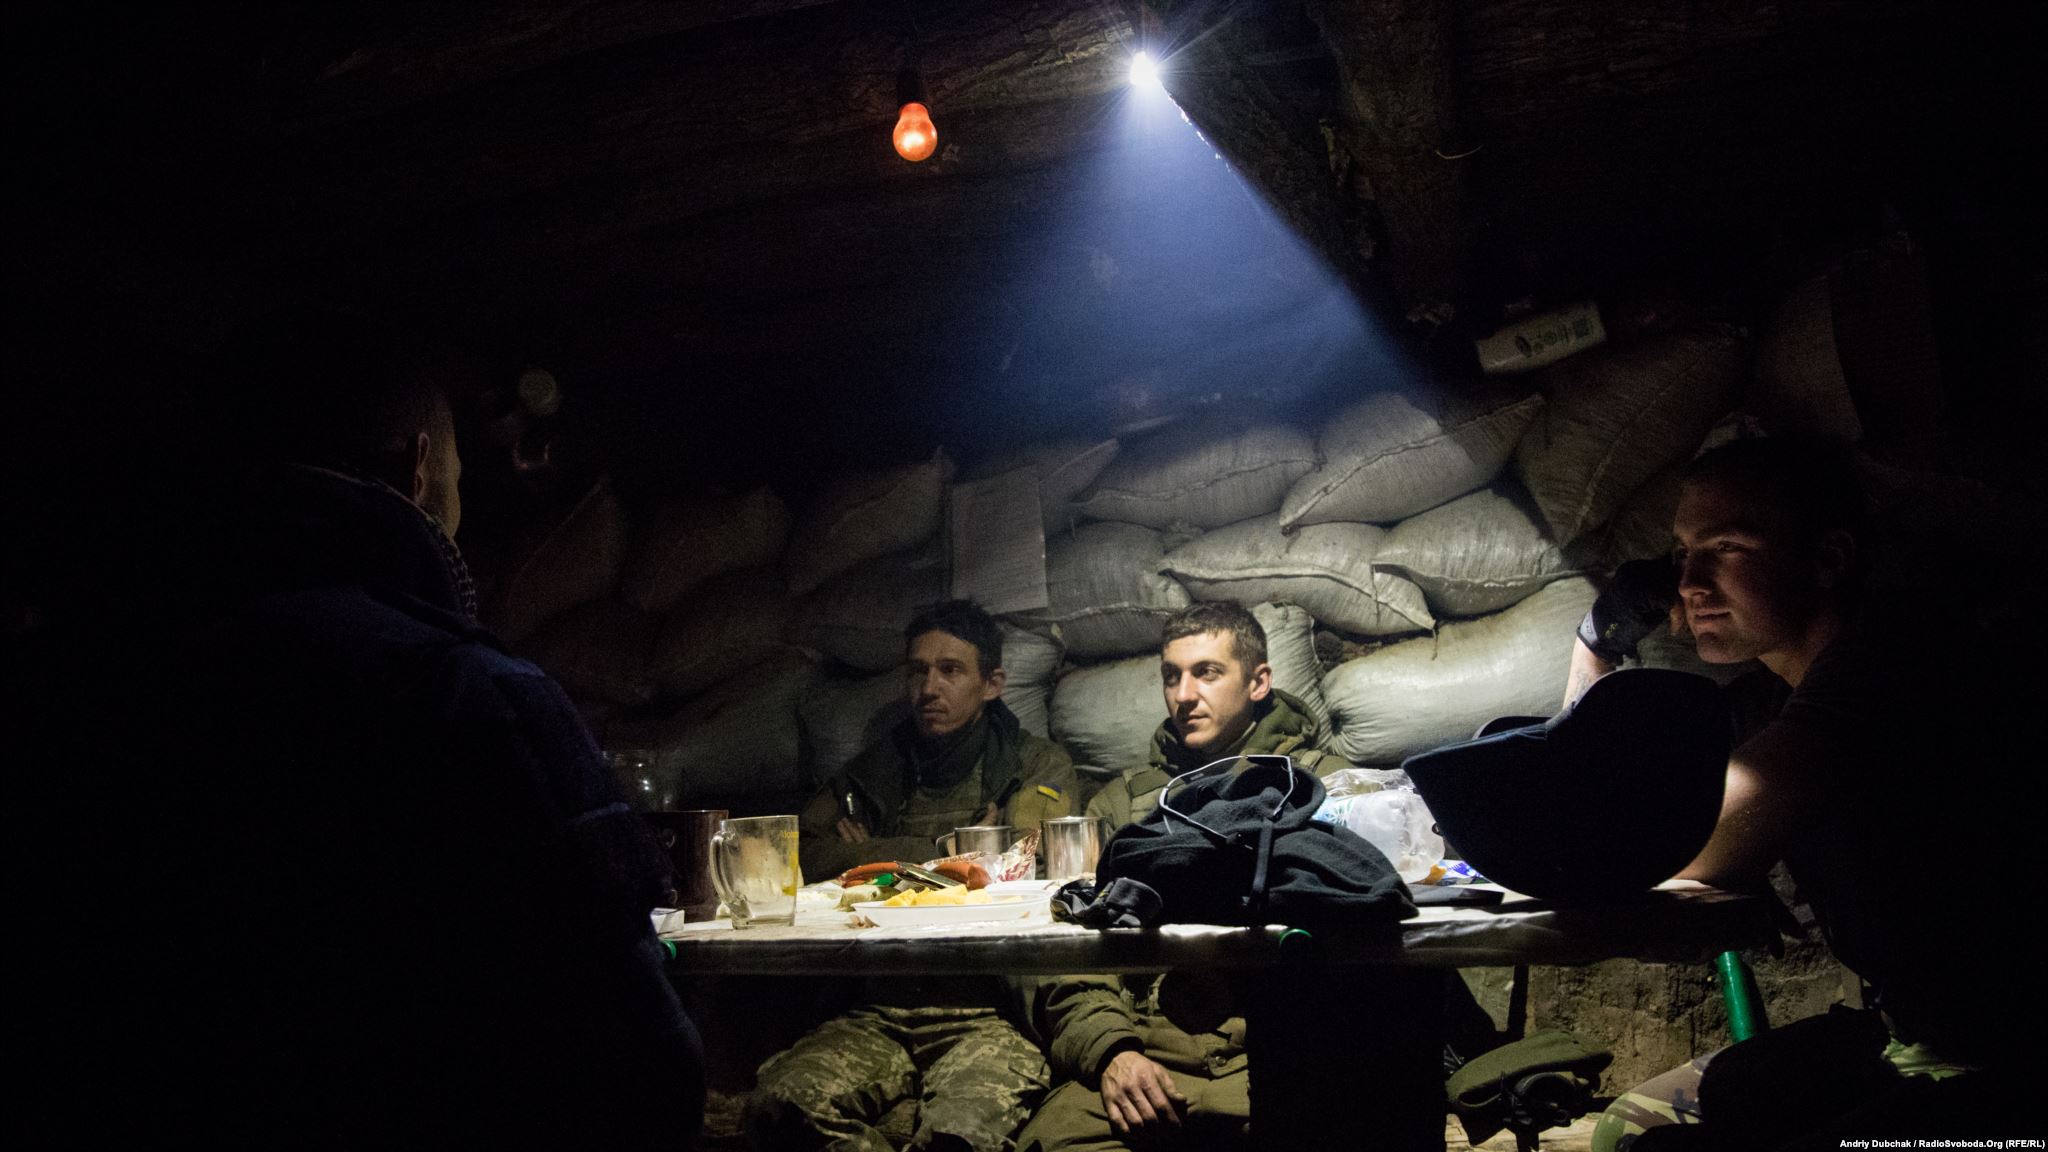 Dinner in the middle of fighting. Men drink tea and rest in a kitchen-dugout, while other soldiers were suppressing enemy fire. (photo by ukrainian military photographer Andriy Dubchak)